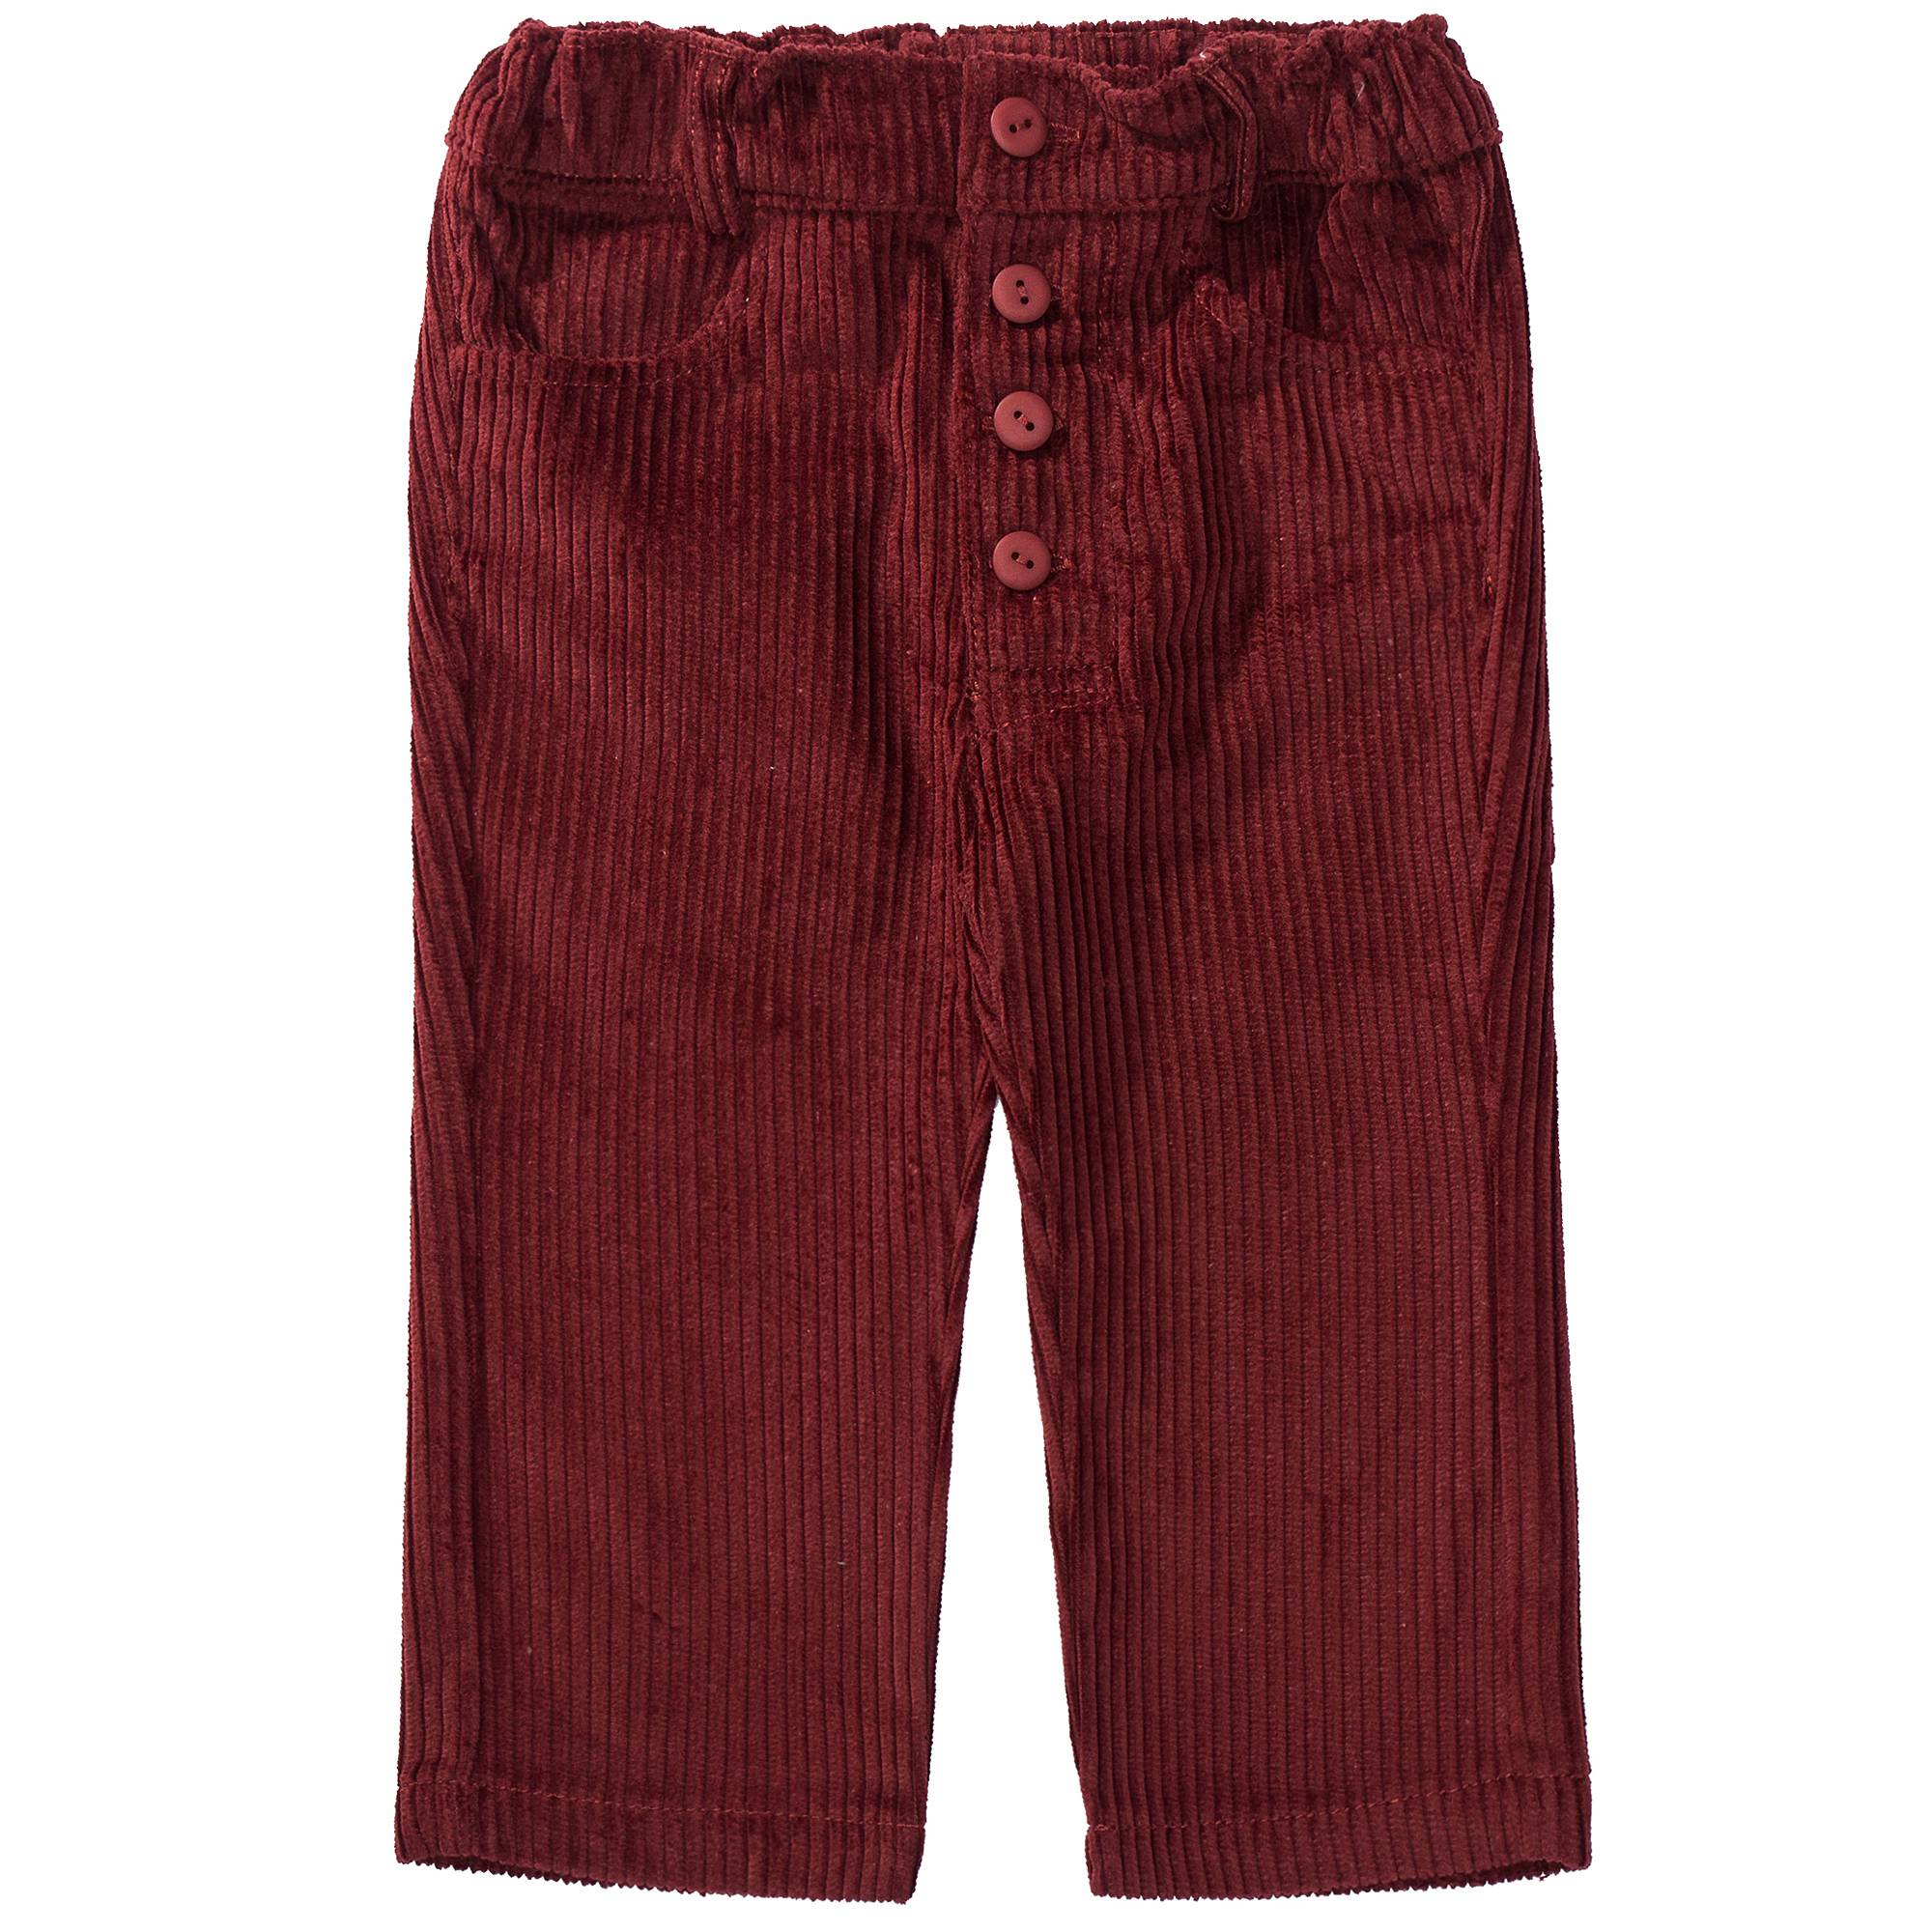 Boys Wine Red Cotton Trousers